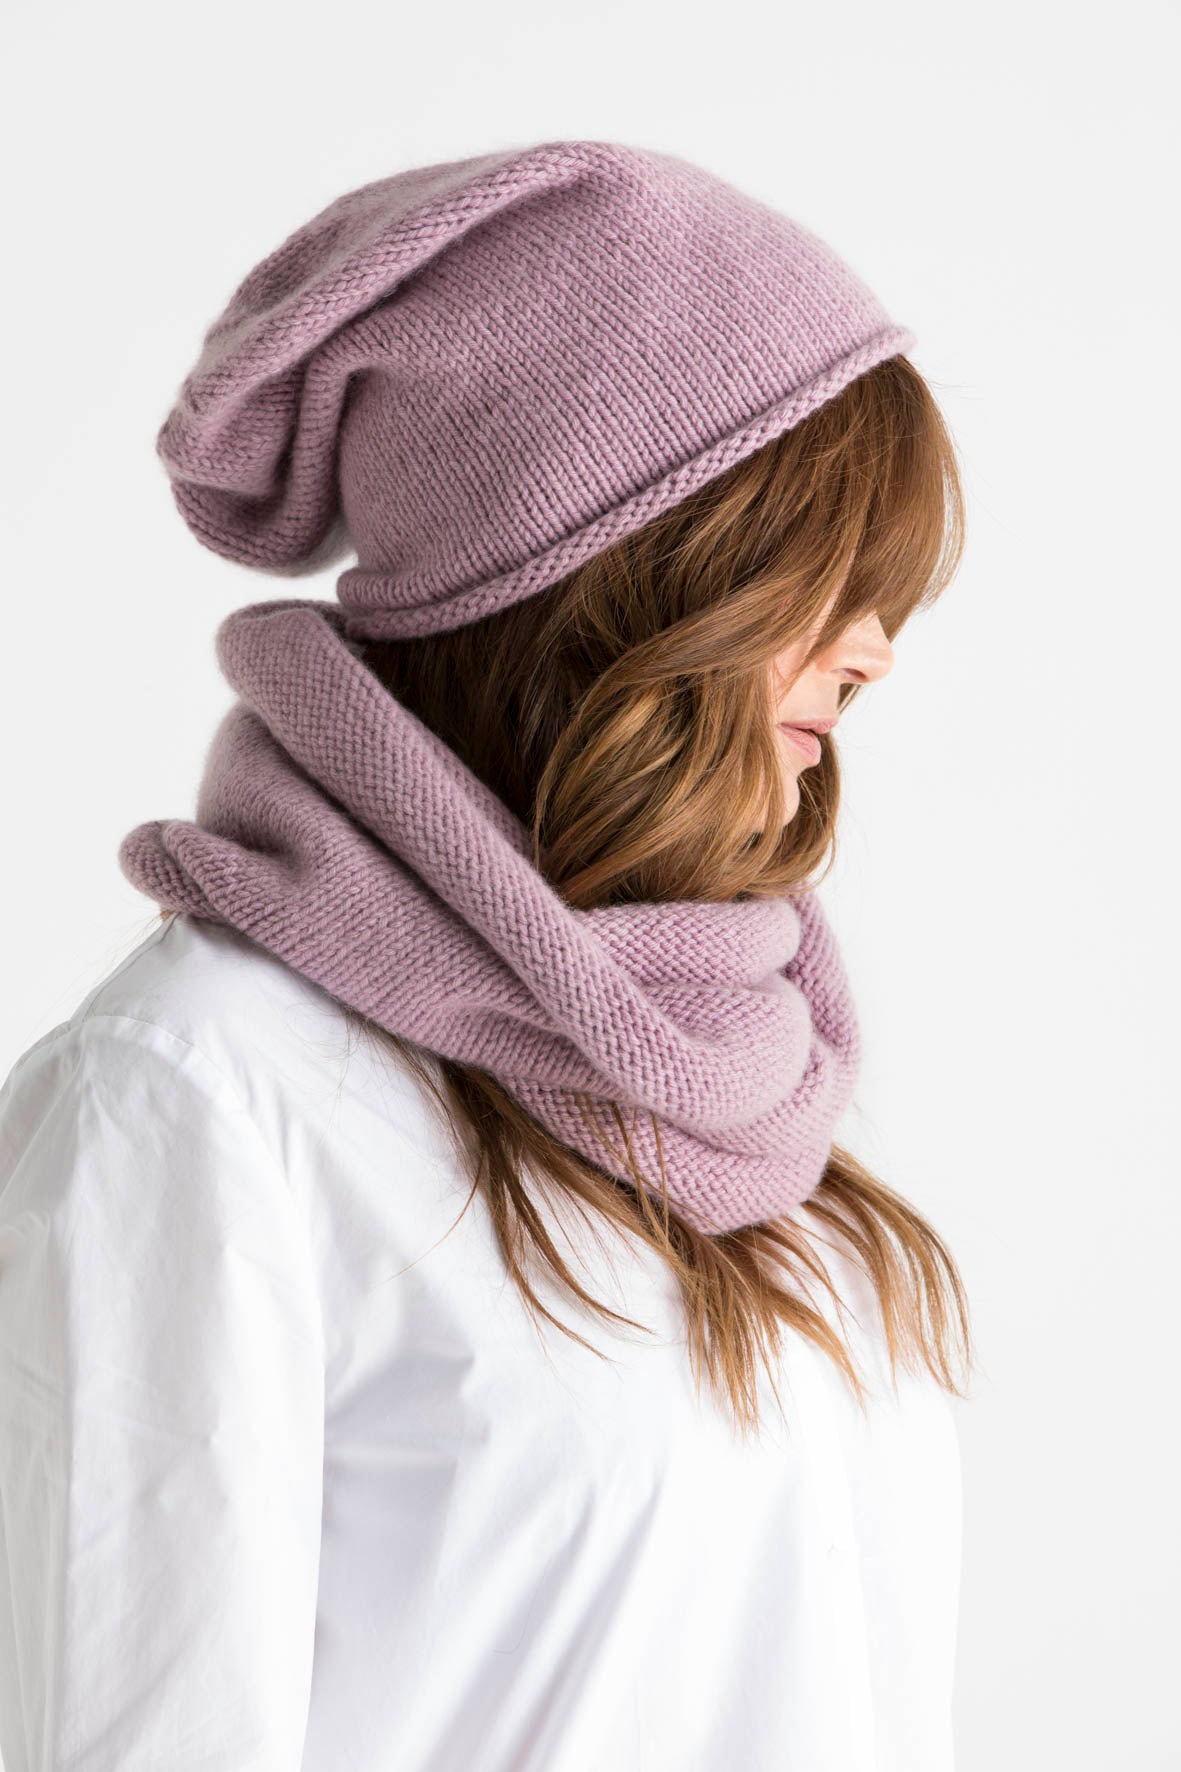 Cashmere Slouchy Hate and Cowl set